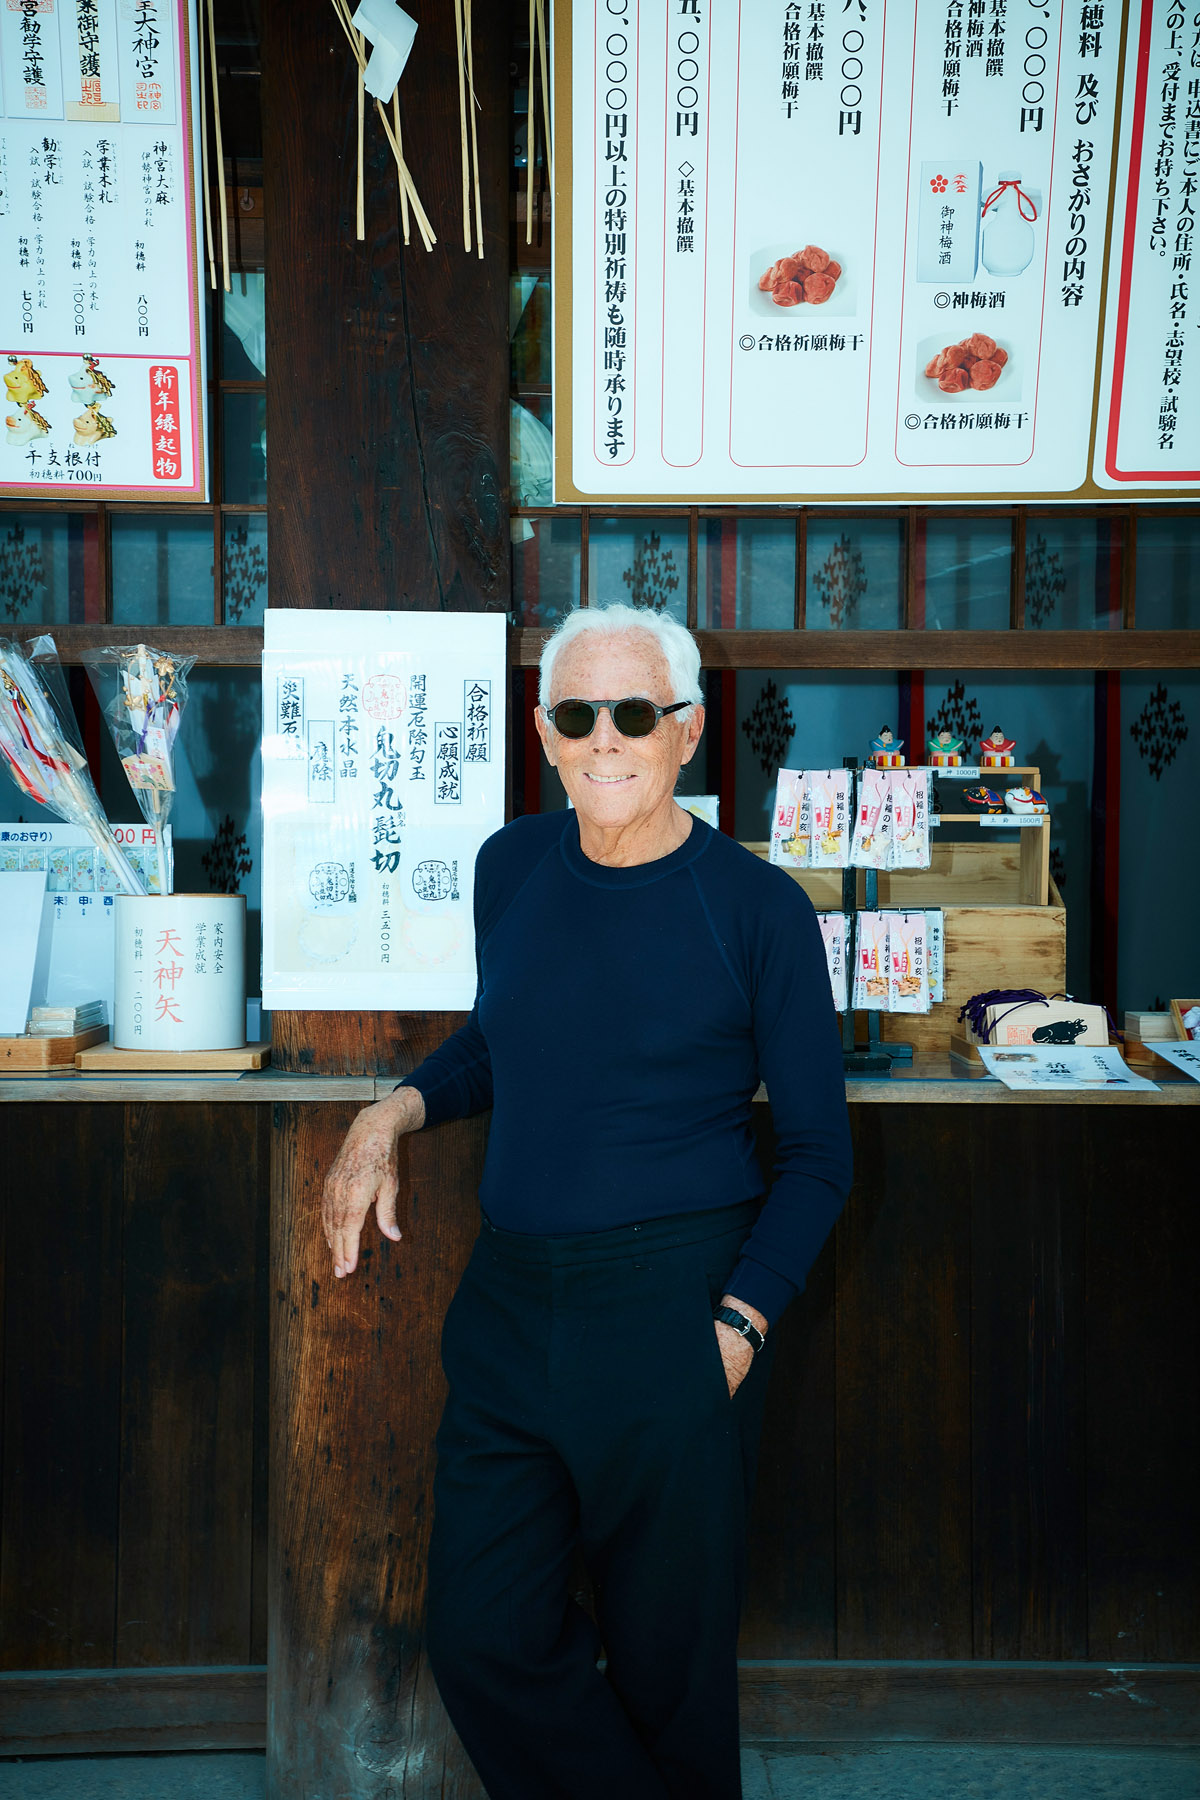 5 Life Lessons To Learn From Giorgio Armani